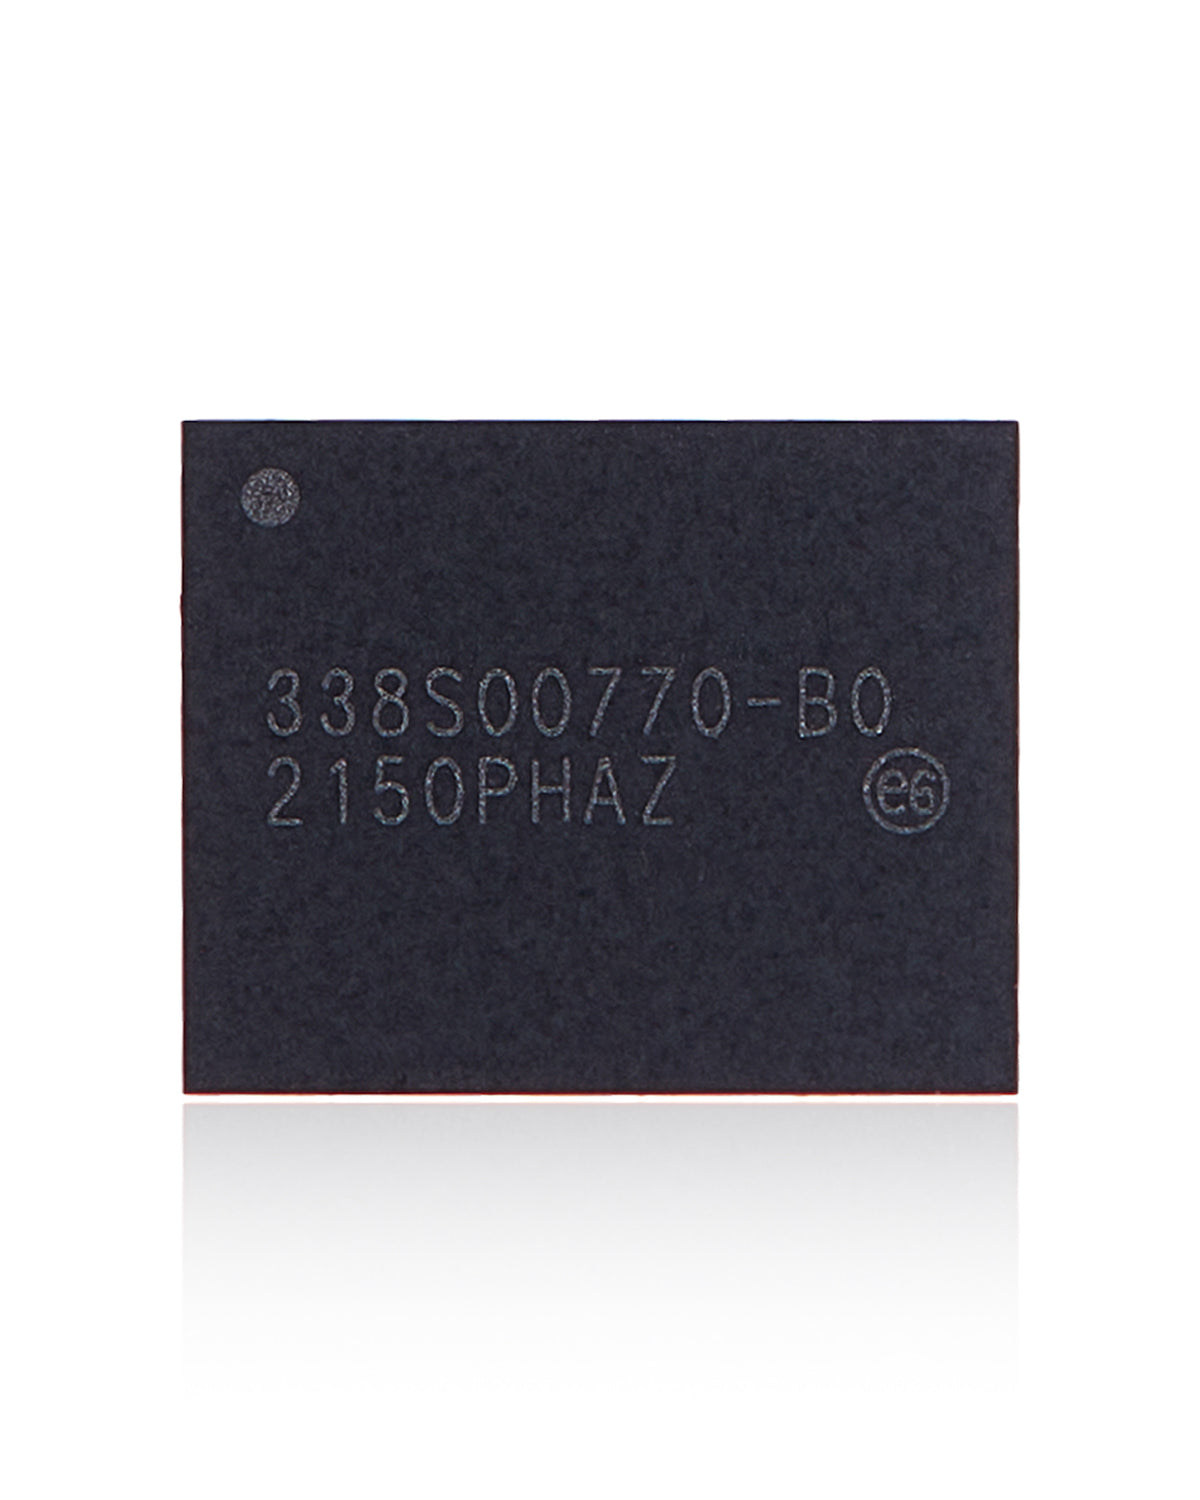 CHARGING IC PMIC POWER MANAGEMENT TIGRIS FOR IPHONE 13 / 13 MINI / 13 PRO / 13 PRO MAX (338S00770)